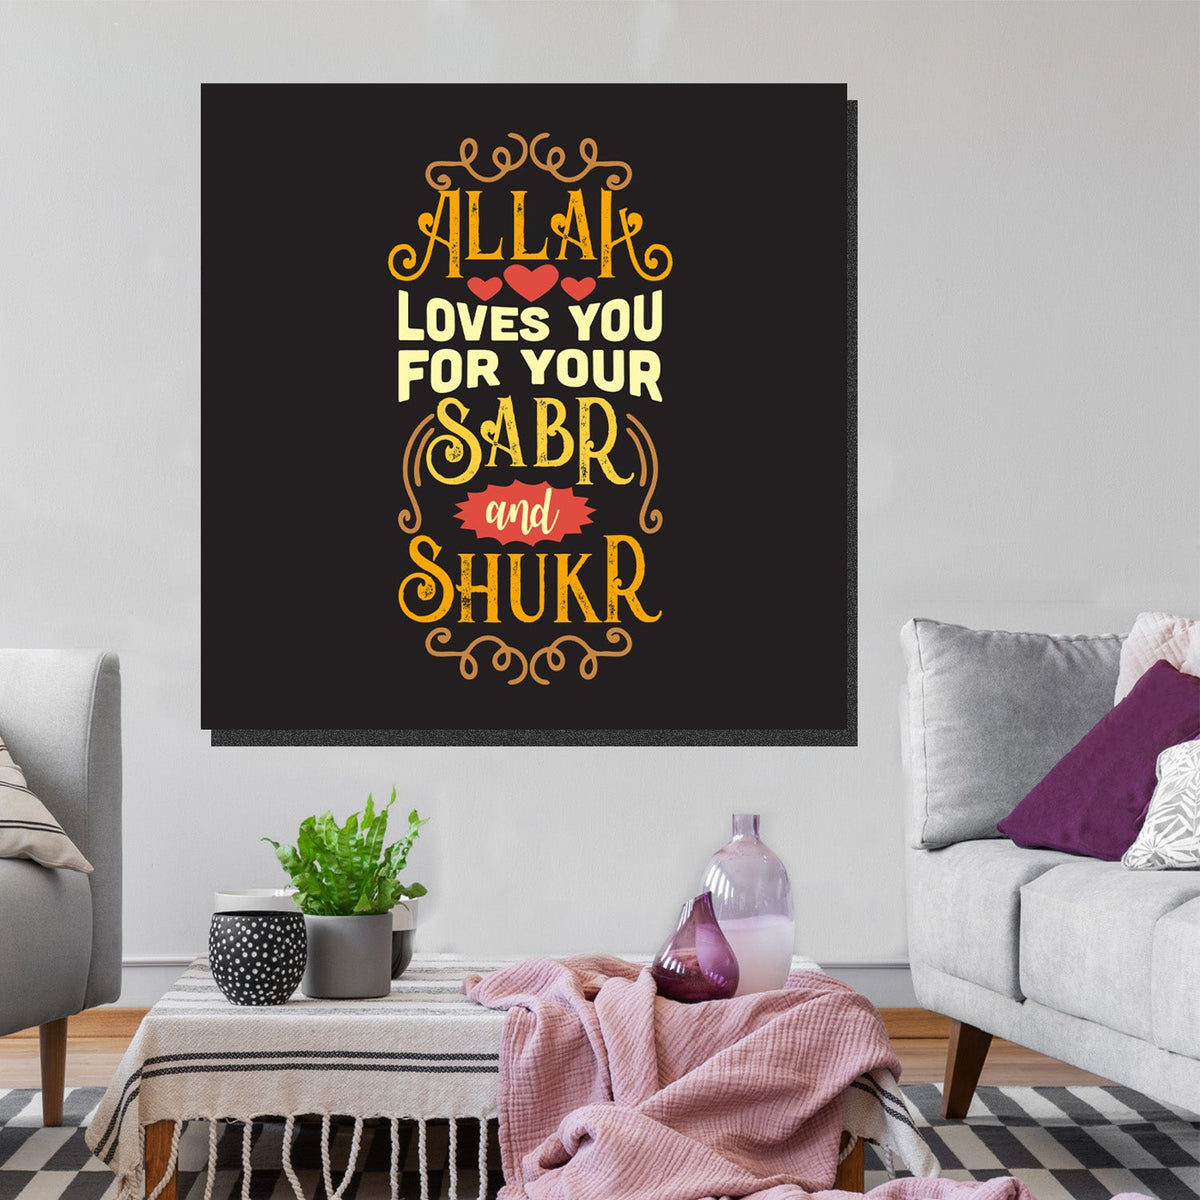 https://cdn.shopify.com/s/files/1/0387/9986/8044/products/AllahLovesYouCanvasArtprintStretched-2.jpg